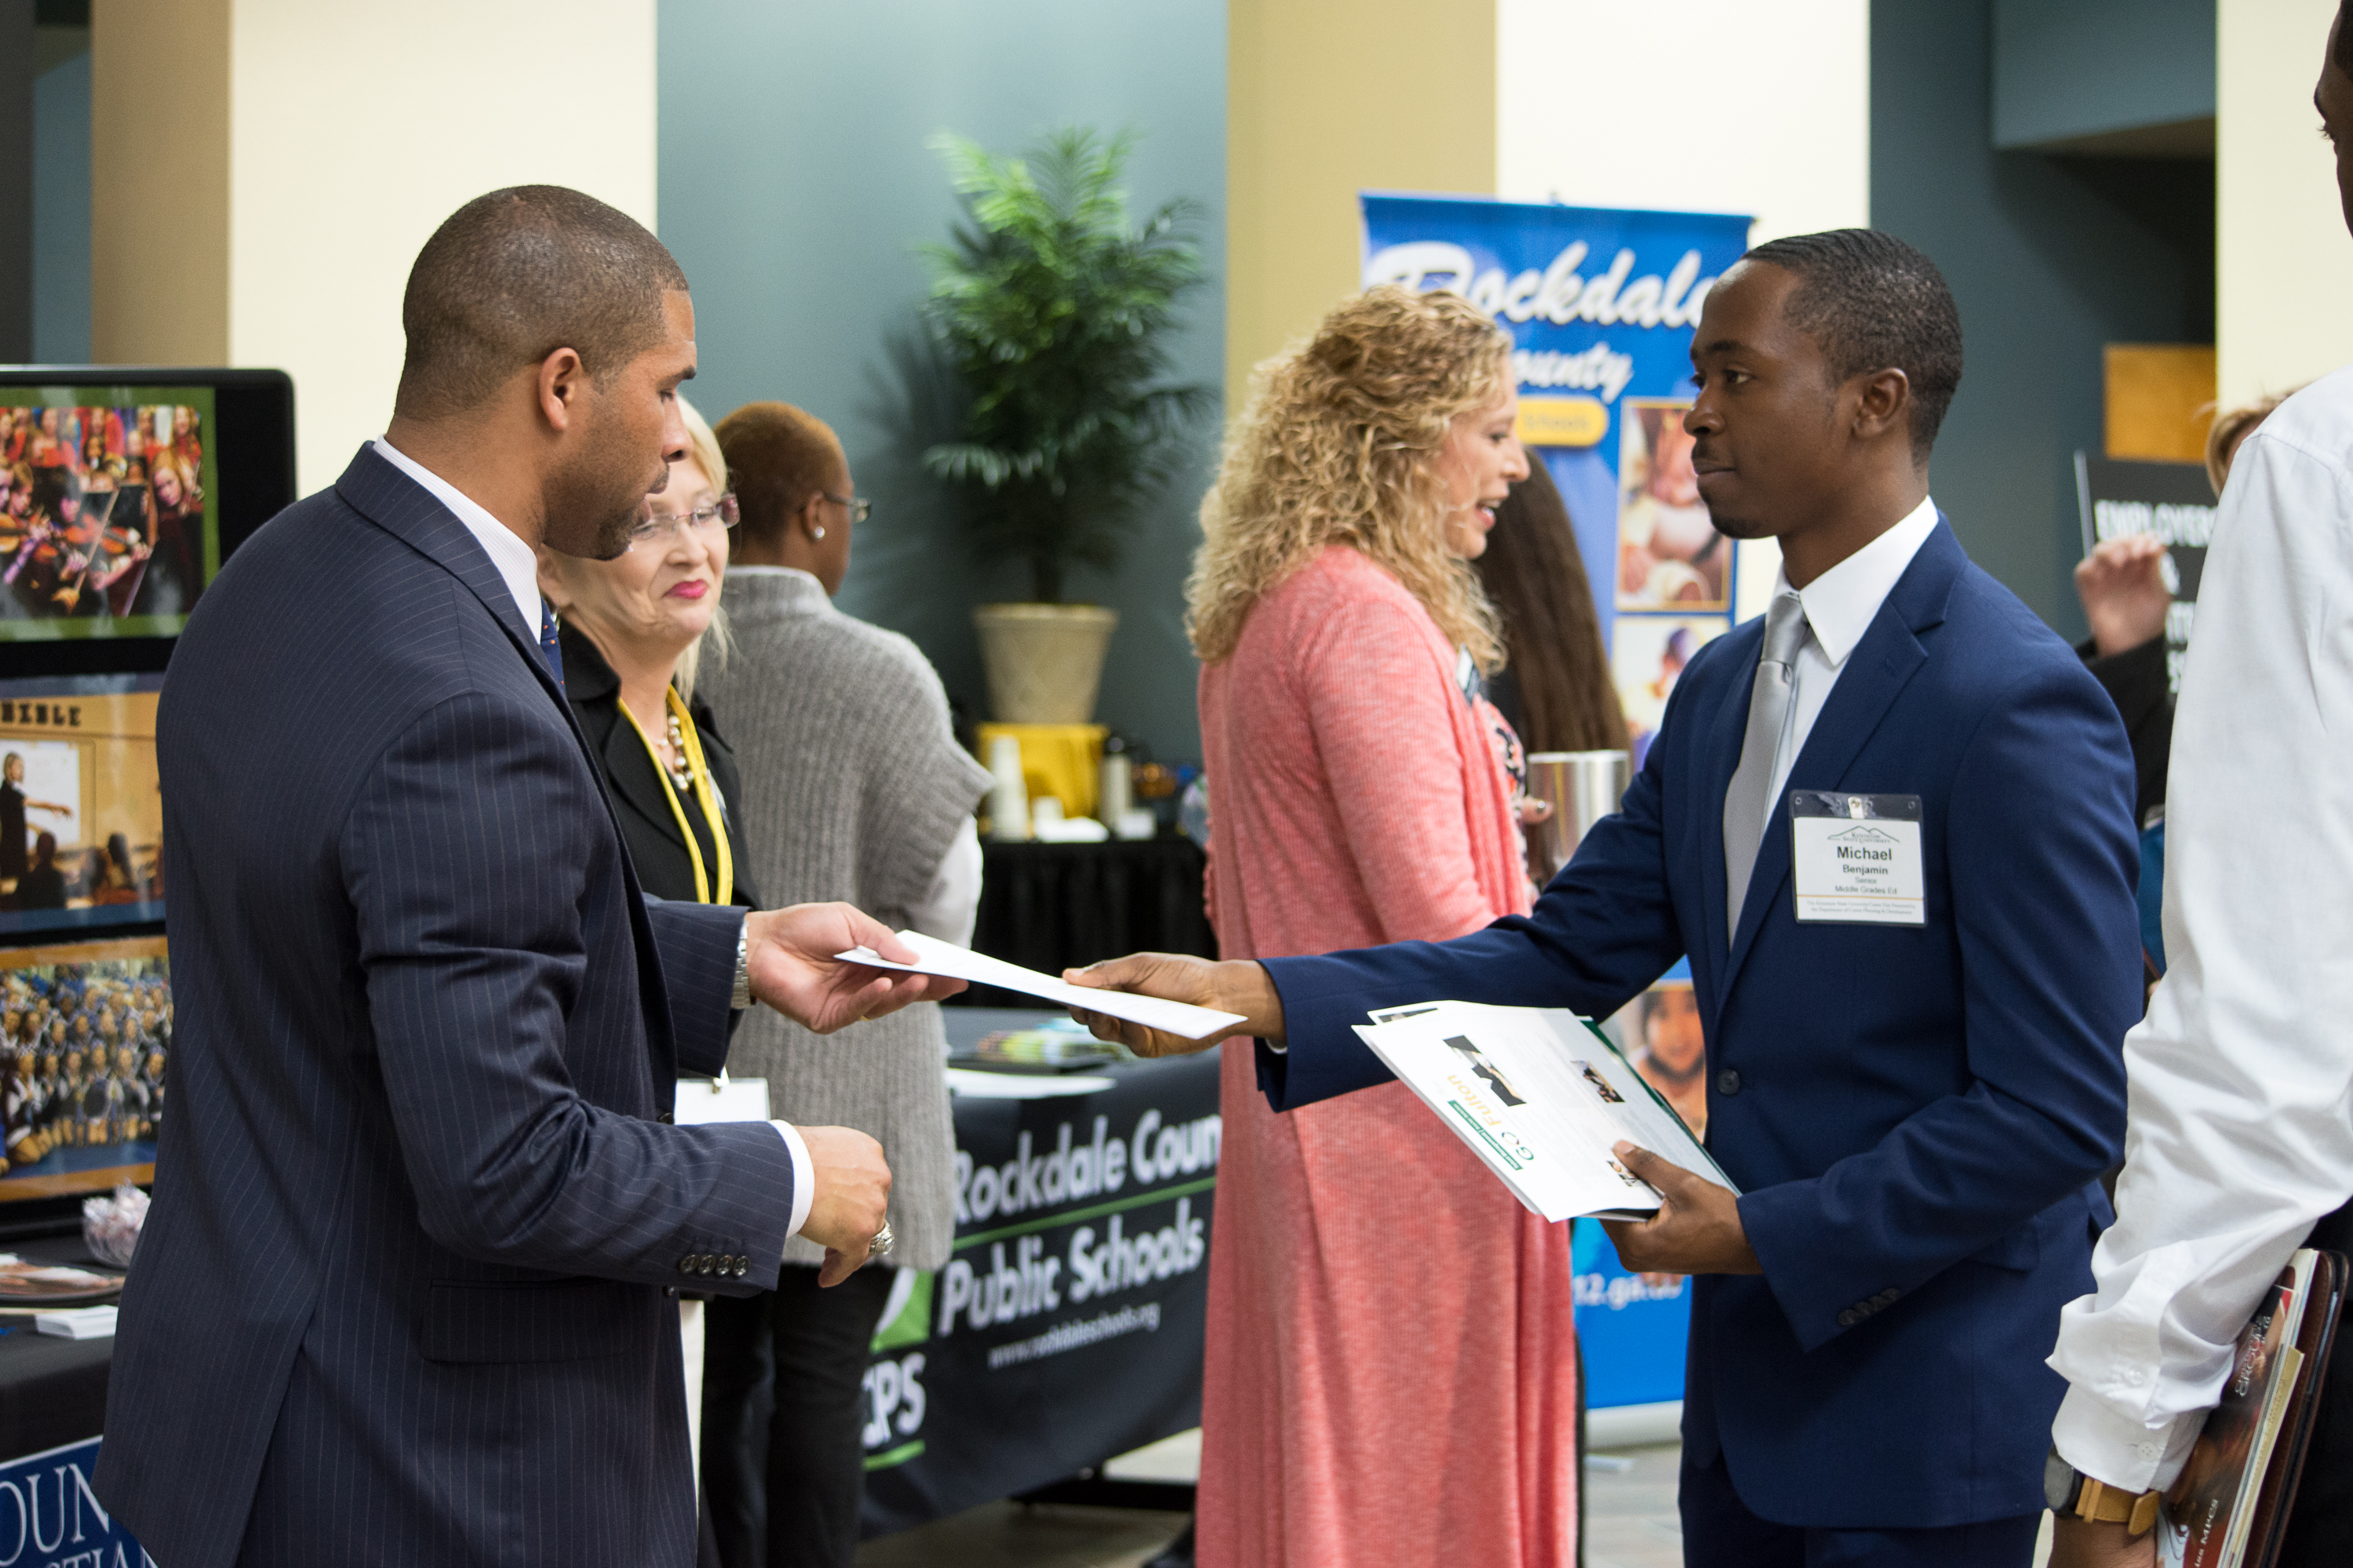 Education career fair offers opportunities to all majors